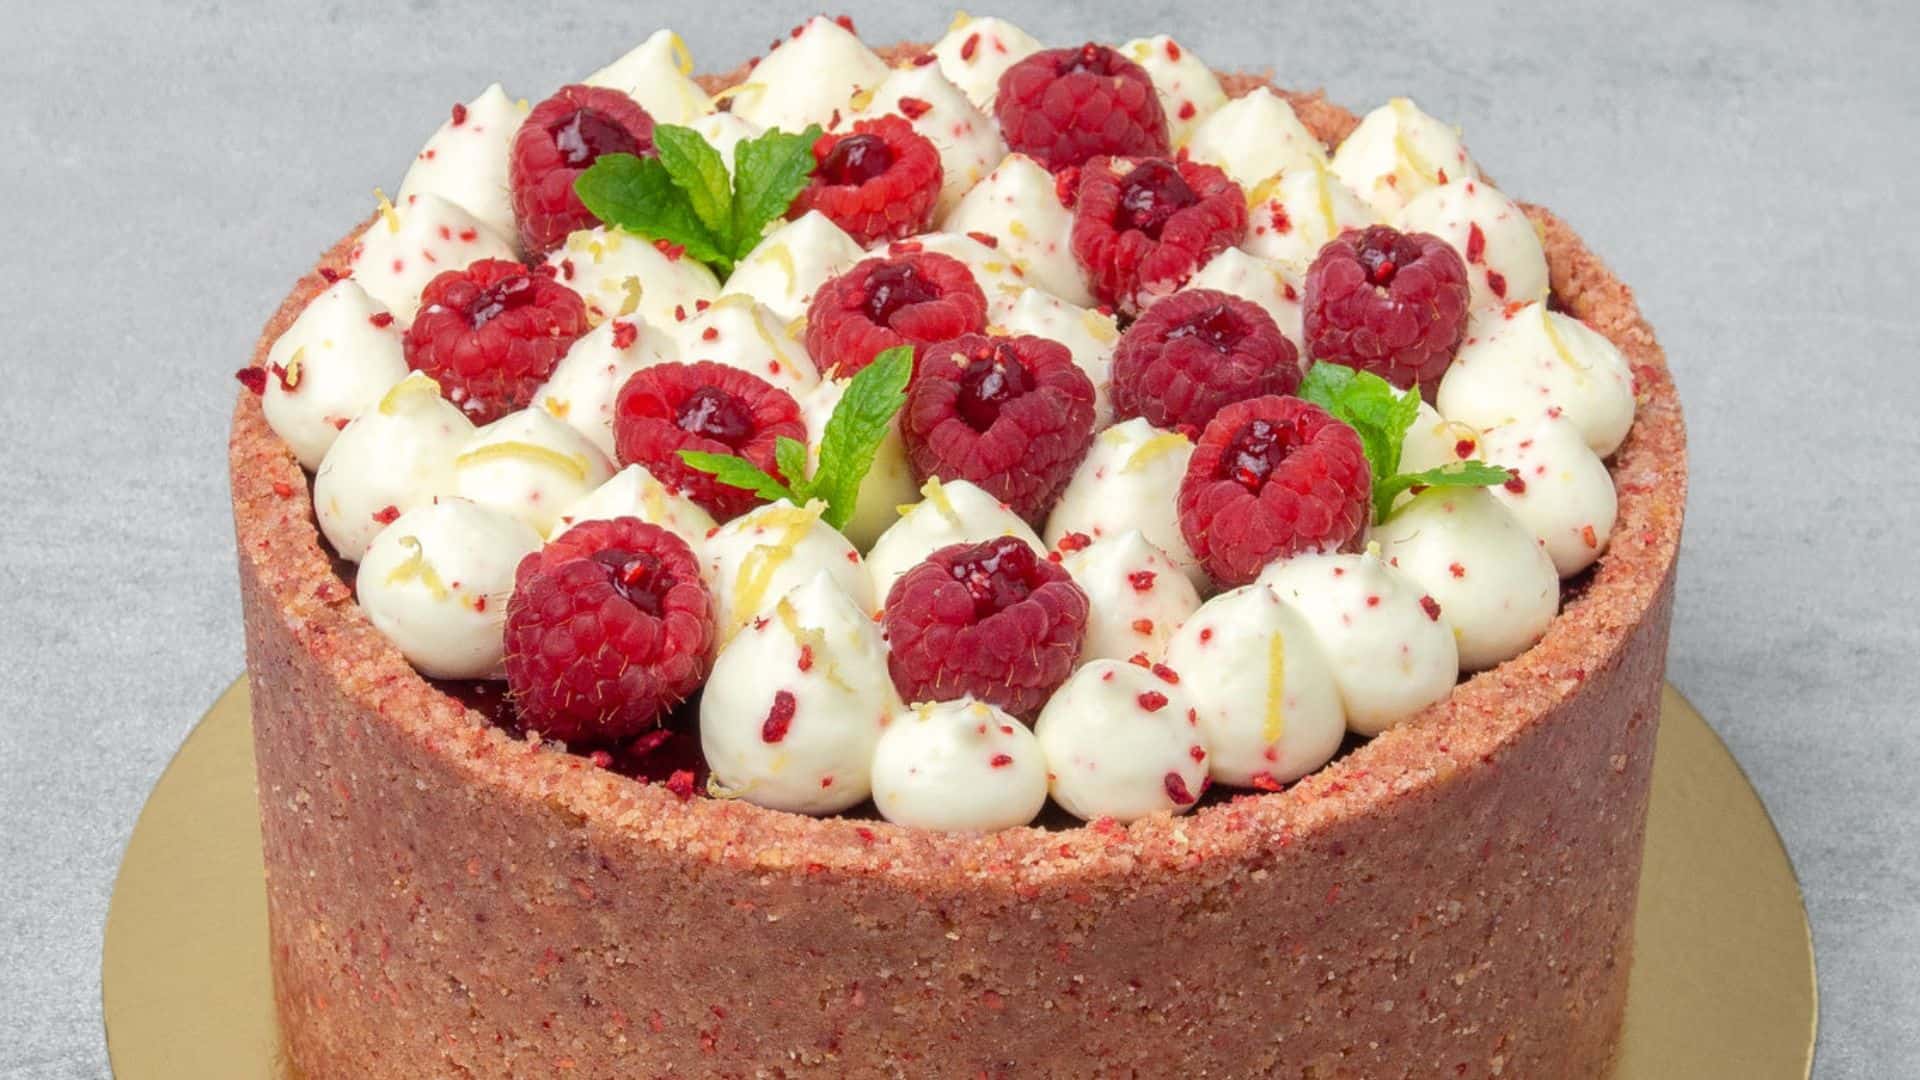 <p>We just love a good raspberry dessert especially if they are so easy to make like this collection of recipes. From classic recipes like raspberry tart to more creative options like raspberry cheesecake cookies, we've rounded up 21 easy and indulgent dessert recipes that are sure to satisfy your sweet tooth. Raspberry Cheesecake Cookies This...</p>